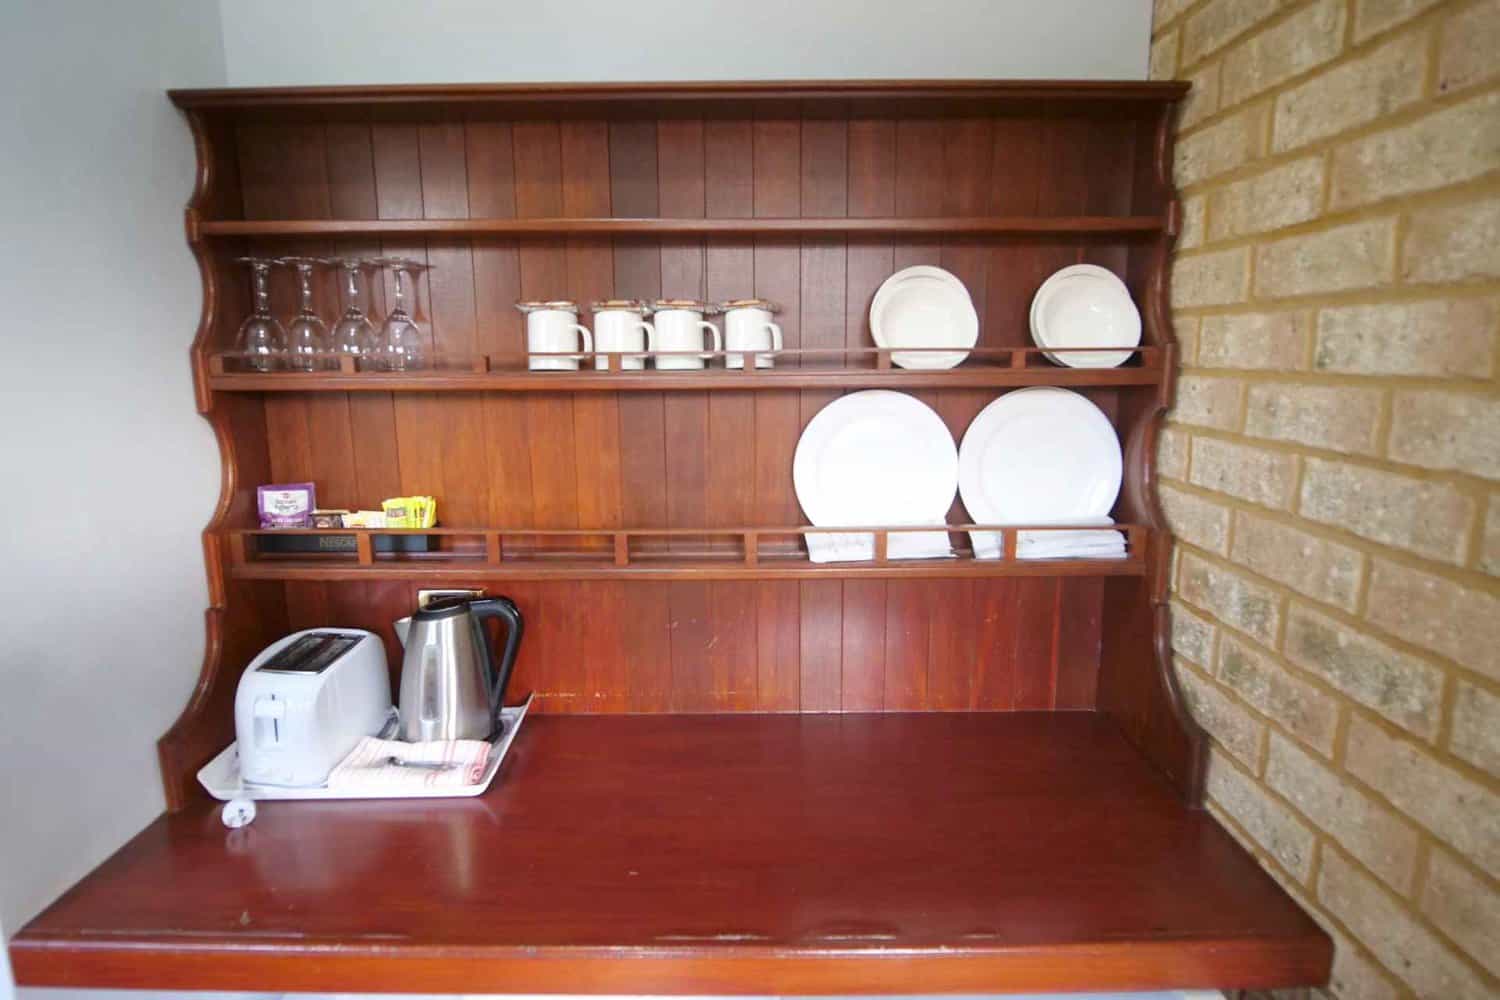 Hotel room amenities with a wooden shelf displaying a tea set, white plates, and glasses, alongside an electric kettle and toaster, ready for a comfortable stay.